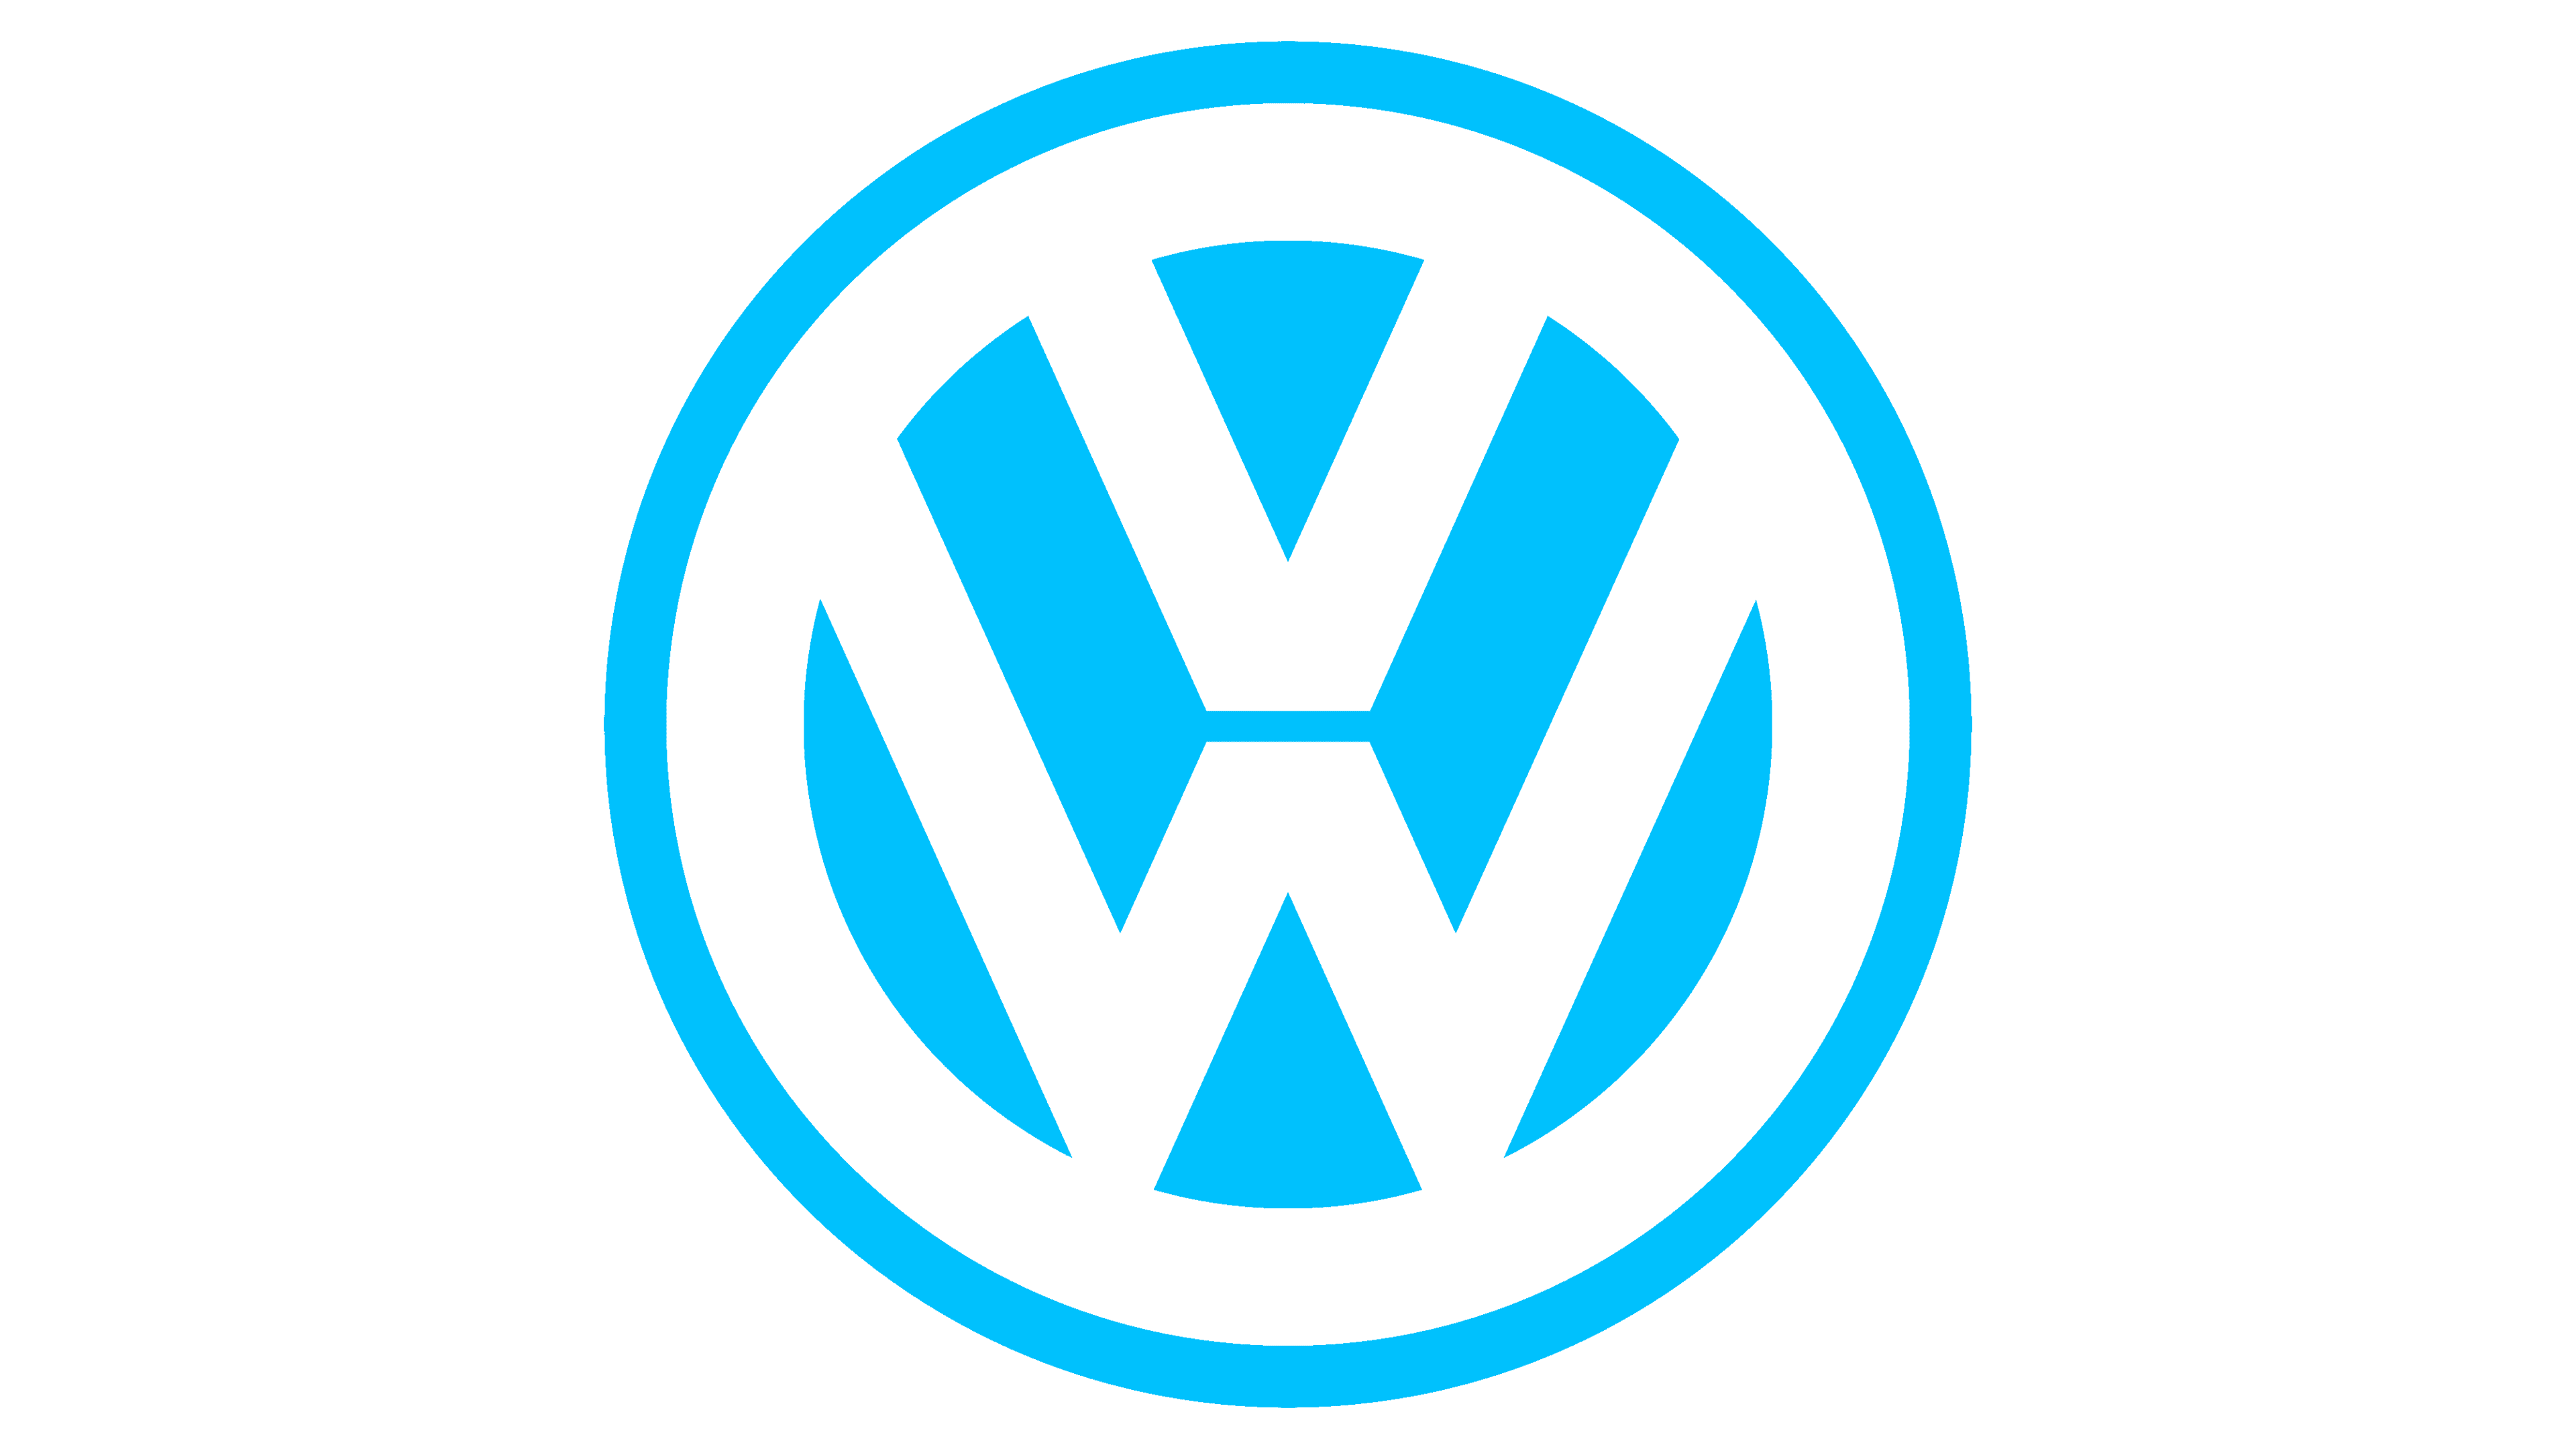 Volkswagen Logo: Meaning, History & More